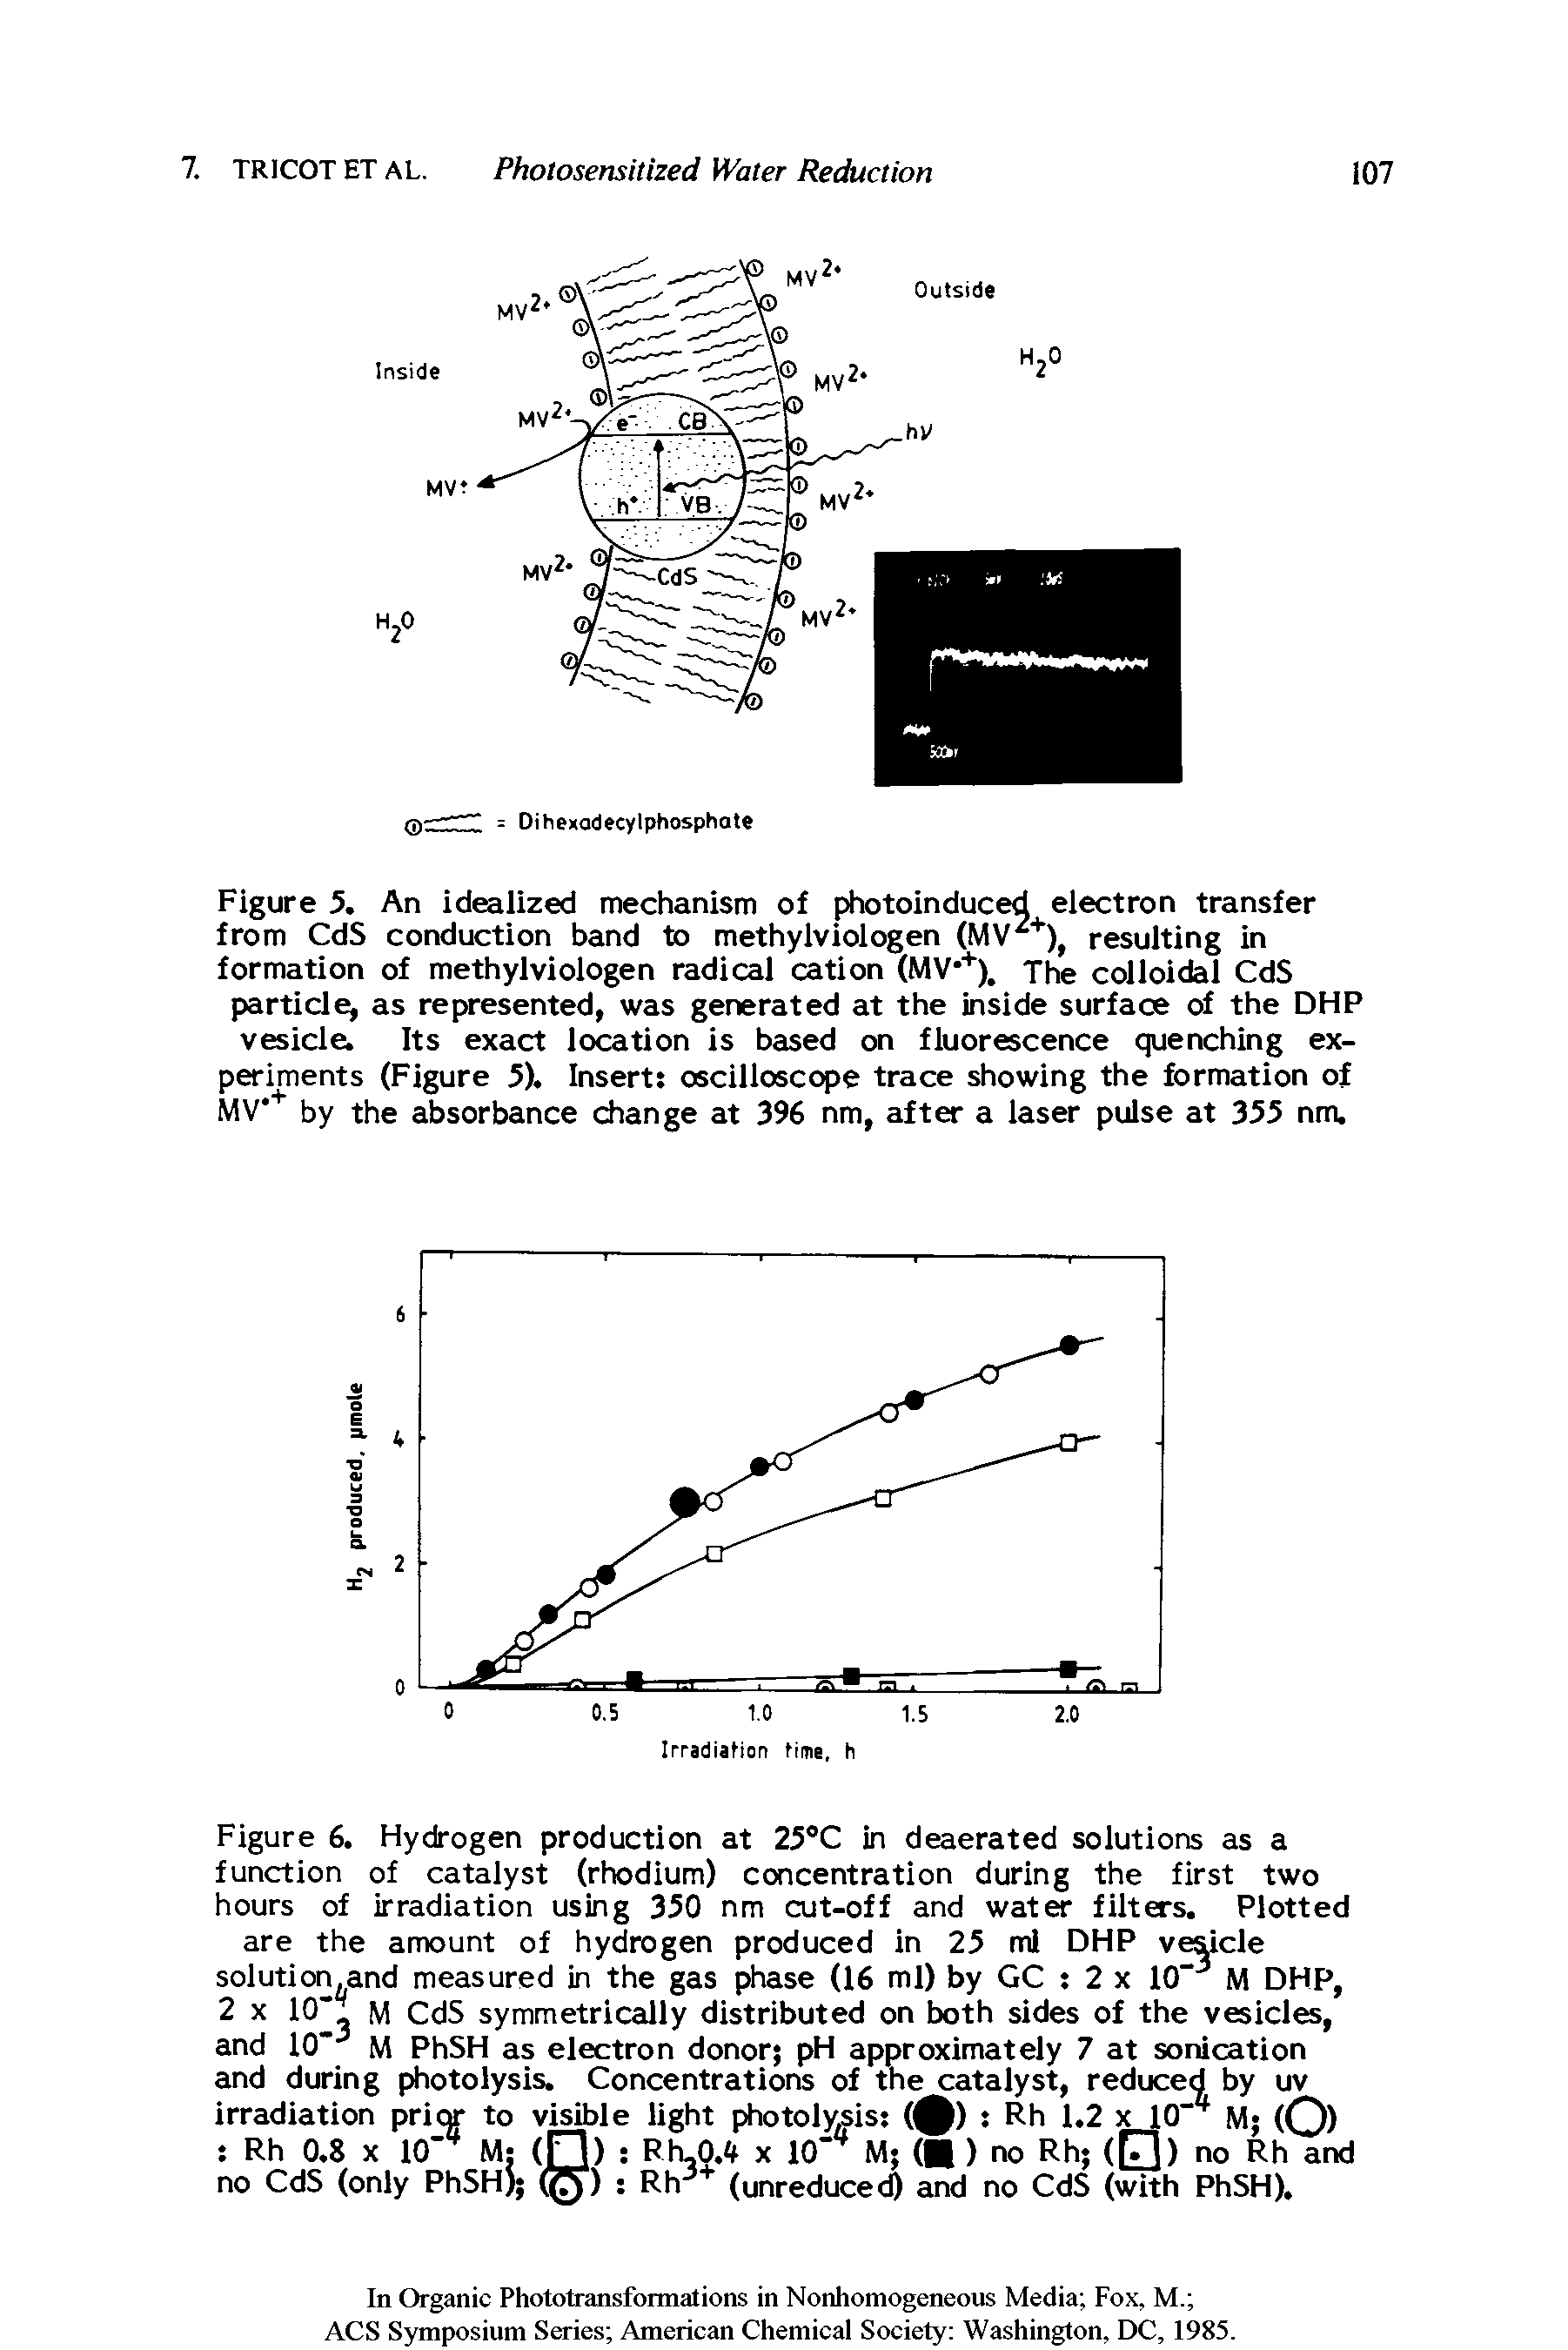 Figure 6. Hydrogen production at 25°C in deaerated solutions as a function of catalyst (rhodium) concentration during the first two hours of irradiation using 350 nm cut-off and water filters. Plotted are the amount of hydrogen produced in 25 ml DHP vesicle solution.and measured in the gas phase (16 ml) by GC s 2 x 10- J M DHP, 2 x 10 M CdS symmetrically distributed on both sides of the vesicles, and 10 J M PhSH as electron donor pH approximately 7 at sonication and during photolysis. Concentrations of the catalyst, reduced by uv irradiation prior to visible light photolysis ( - Dl 1 ° ...